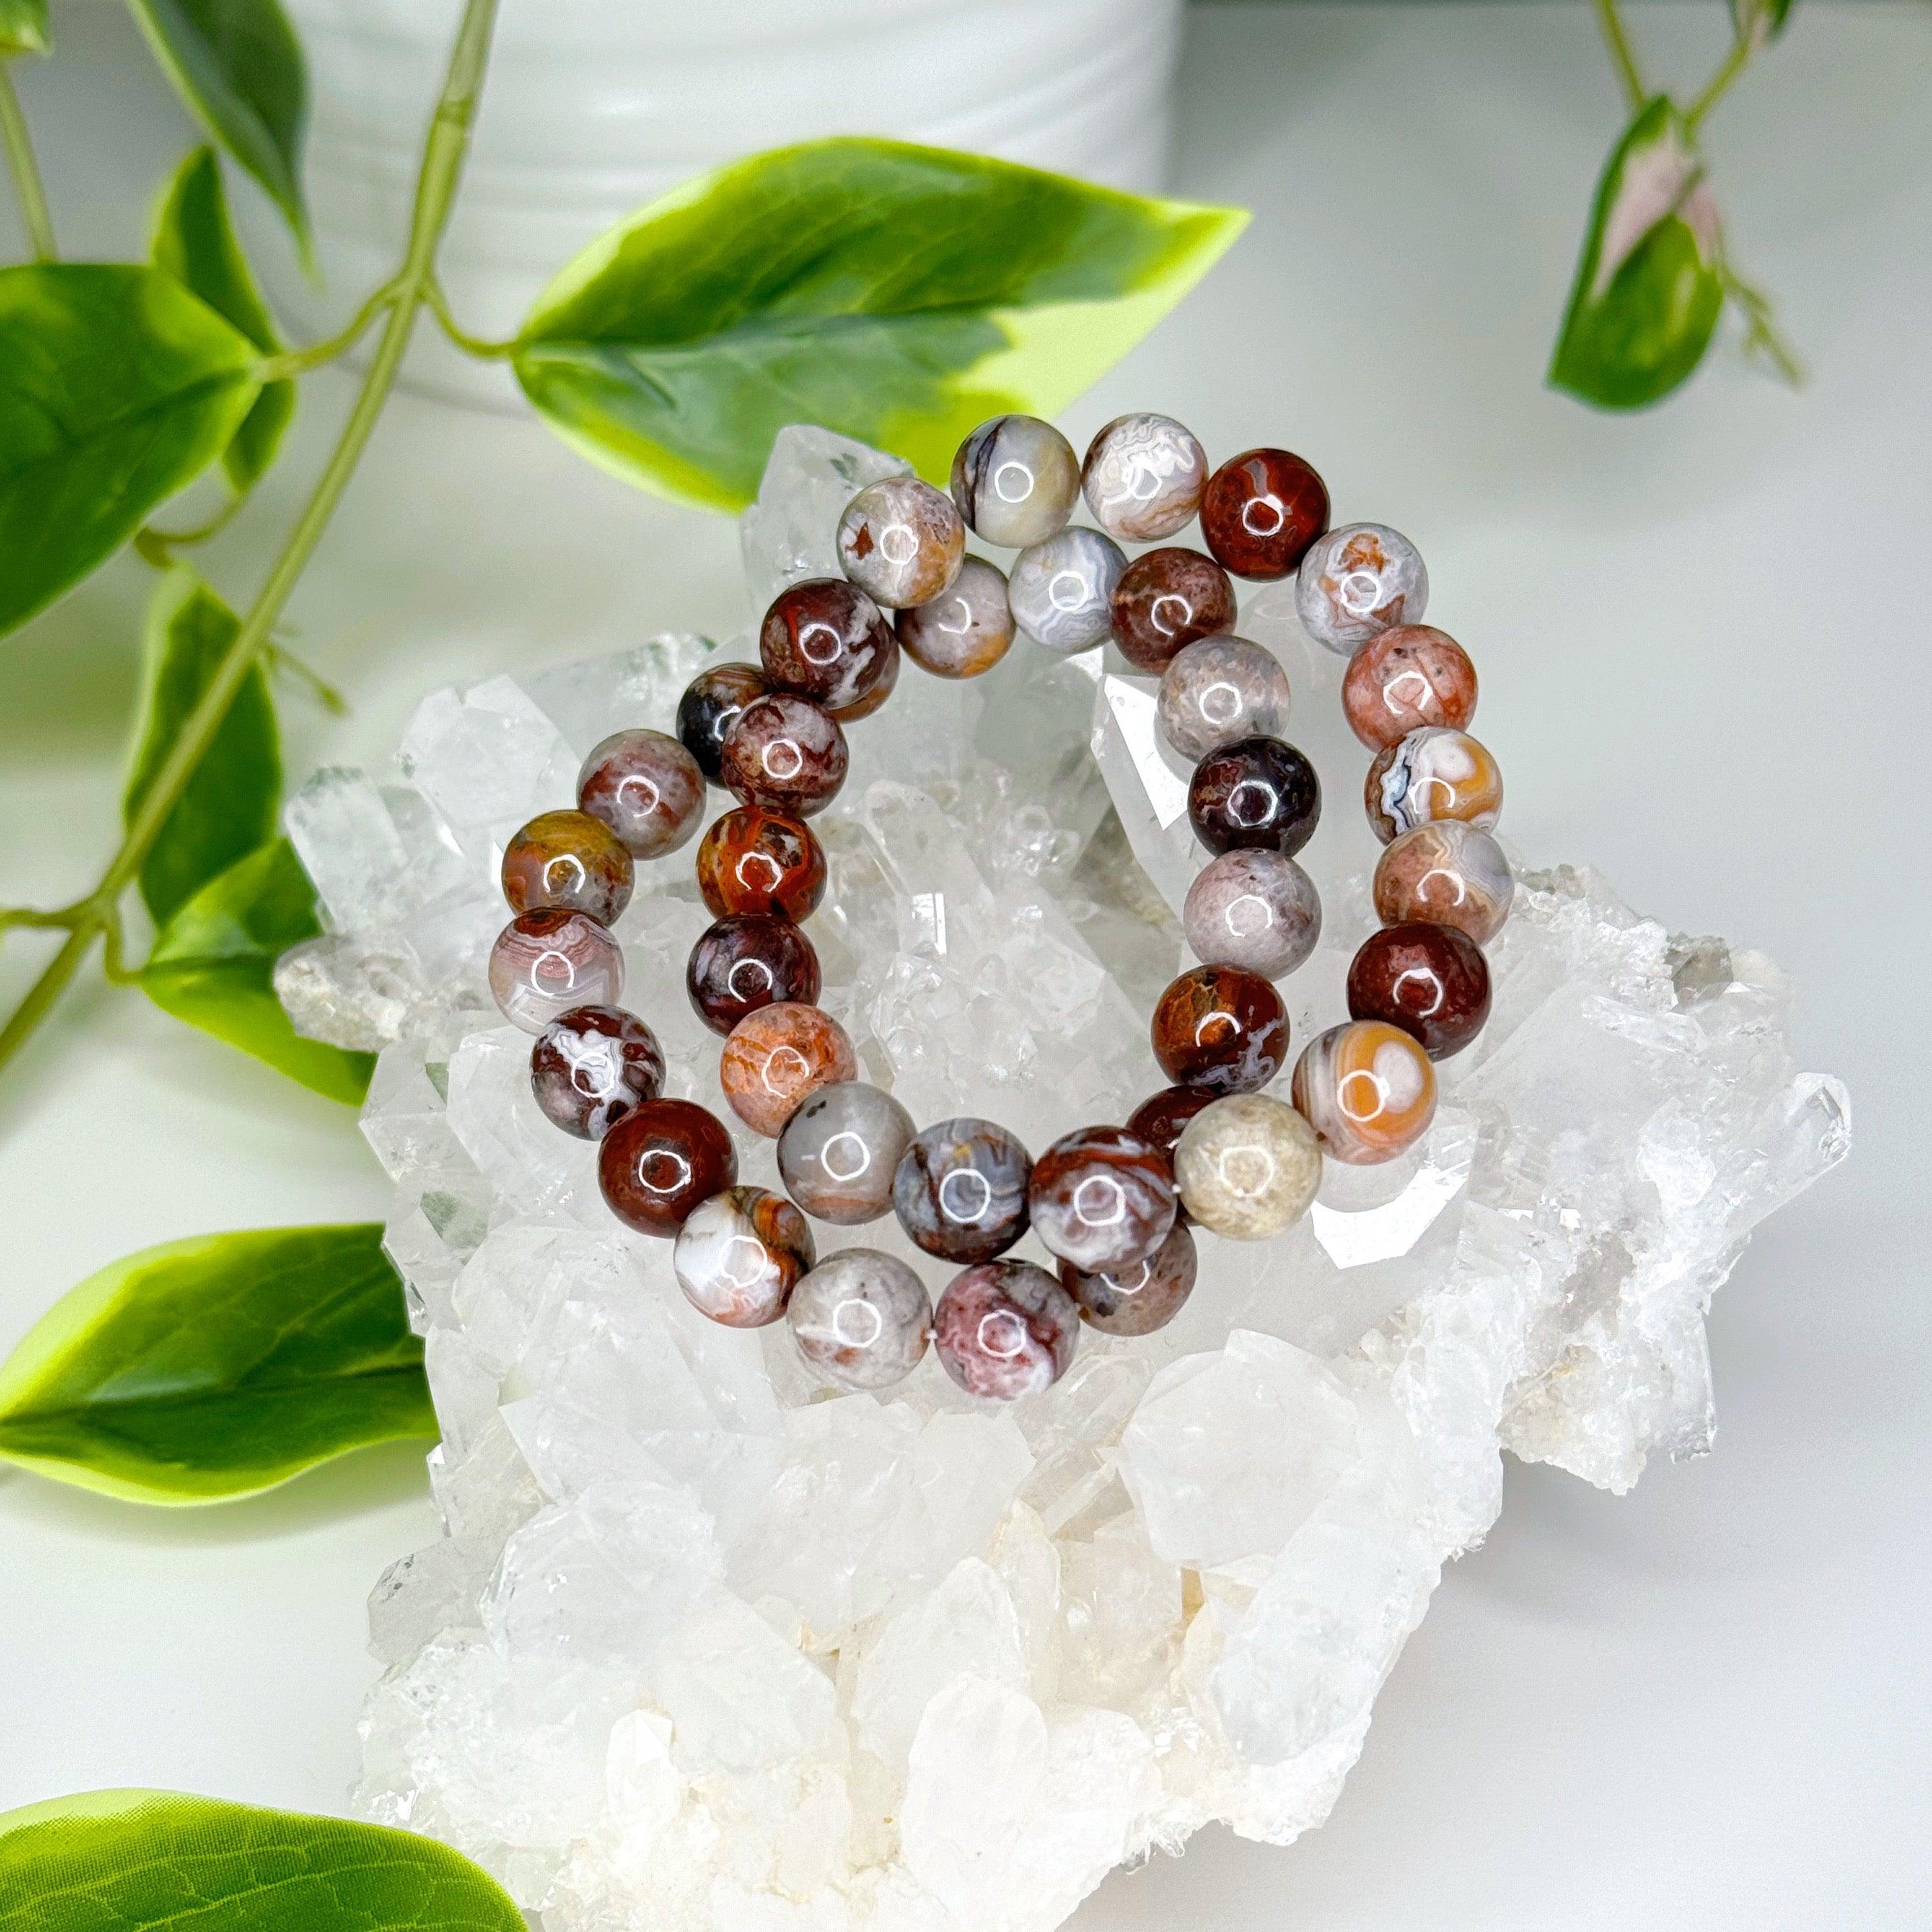 LAGUNA AGATE 10mm - HANDMADE CRYSTAL BRACELET - 10mm, agate, bracelet, brown, crystal bracelet, fire, gemini, gemini stack, grey, handmade bracelet, jewelry, laguna agate, market bracelet, mixed colors, recently added, spring collection, Wearable - The Mineral Maven